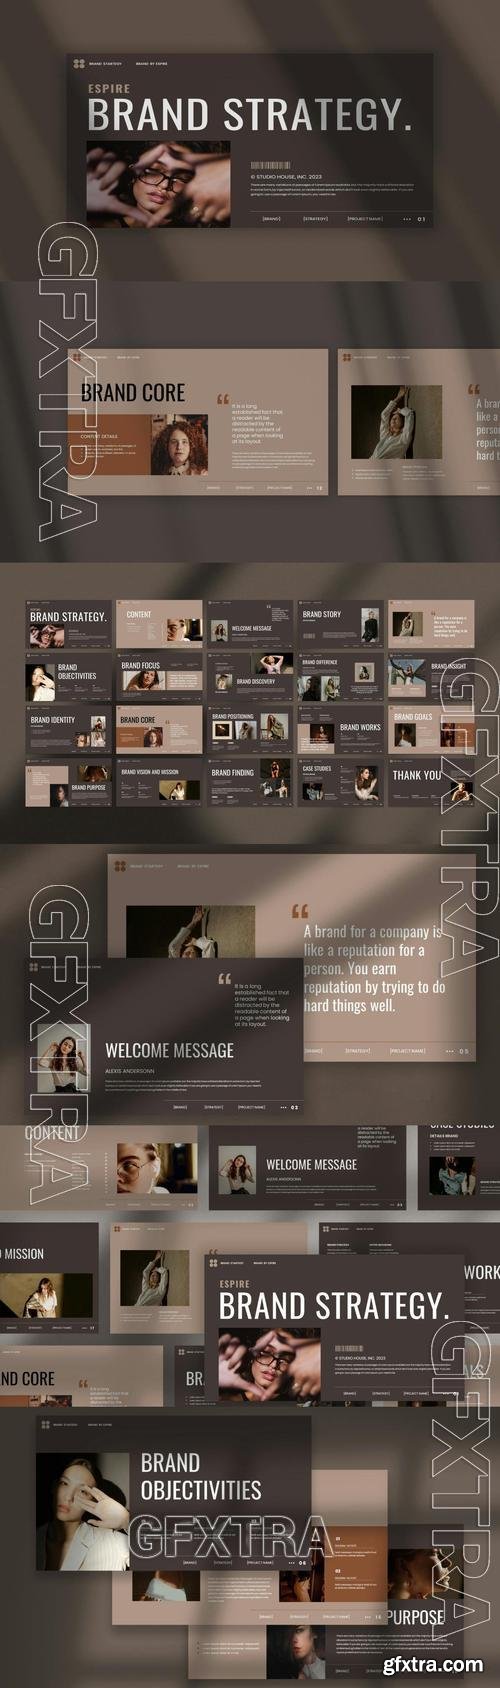 Espire - Brand Strategy Powerpoint Template RQT32H9